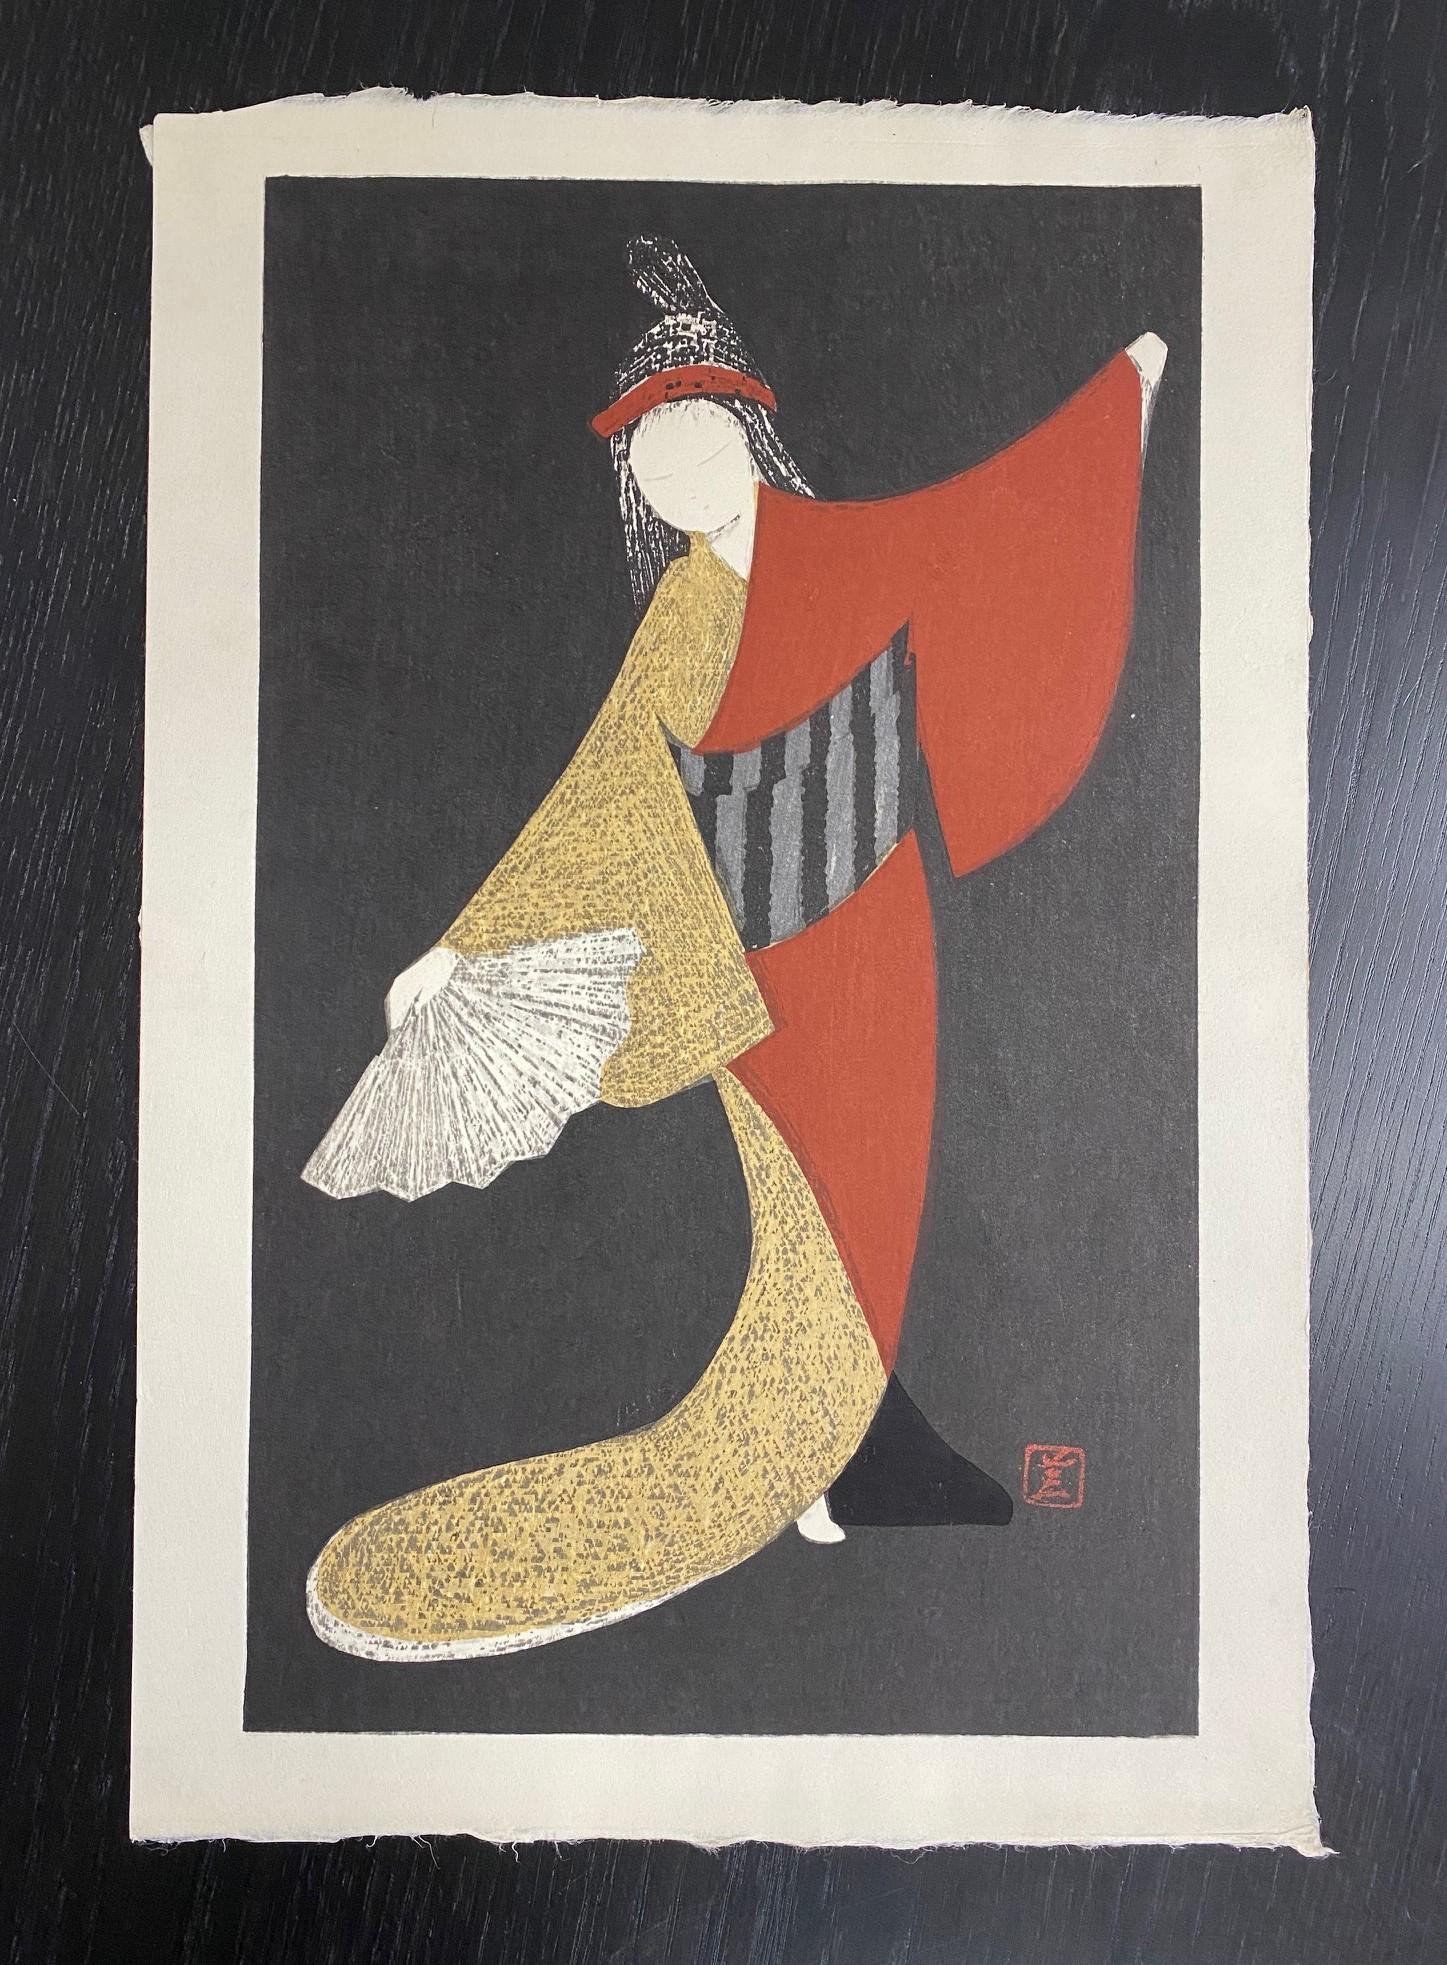 A beautiful work by famed Japanese artist Kaoru Kawano who was known for his whimsical portrayals of women, children, and animals. Stylistically, he was one of the first Japanese artists to combine Western-style elements with the traditional methods